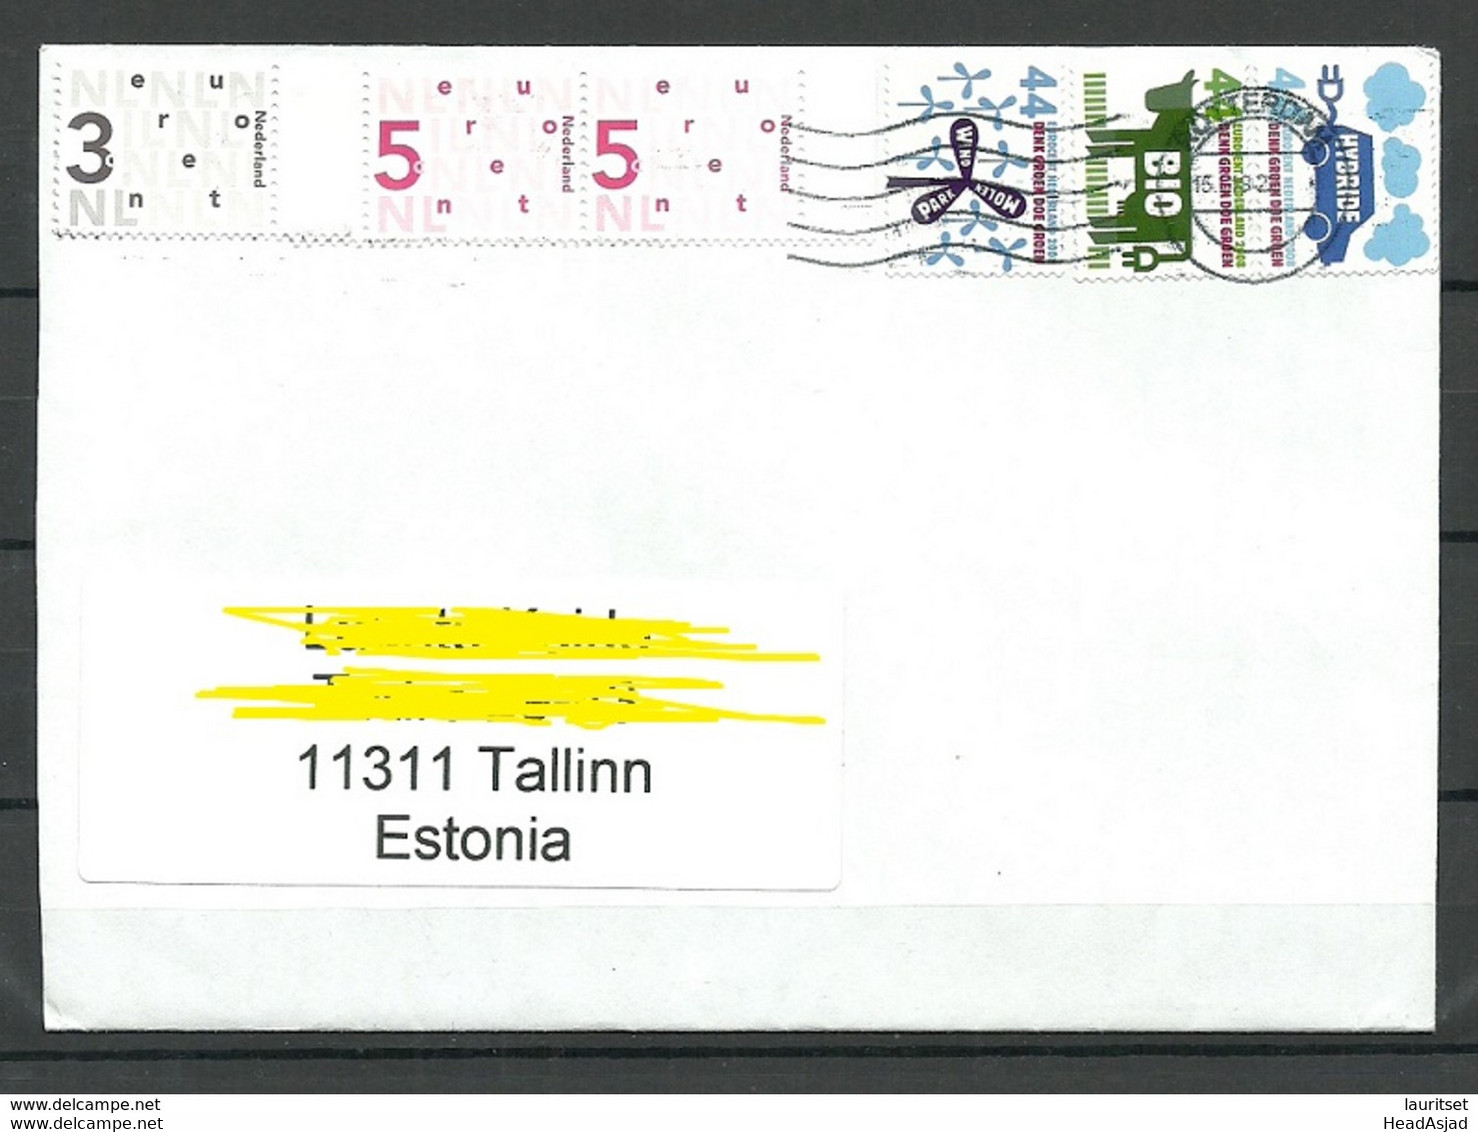 NEDERLAND NETHERLANDS 2019 Cover To Estonia - Lettres & Documents